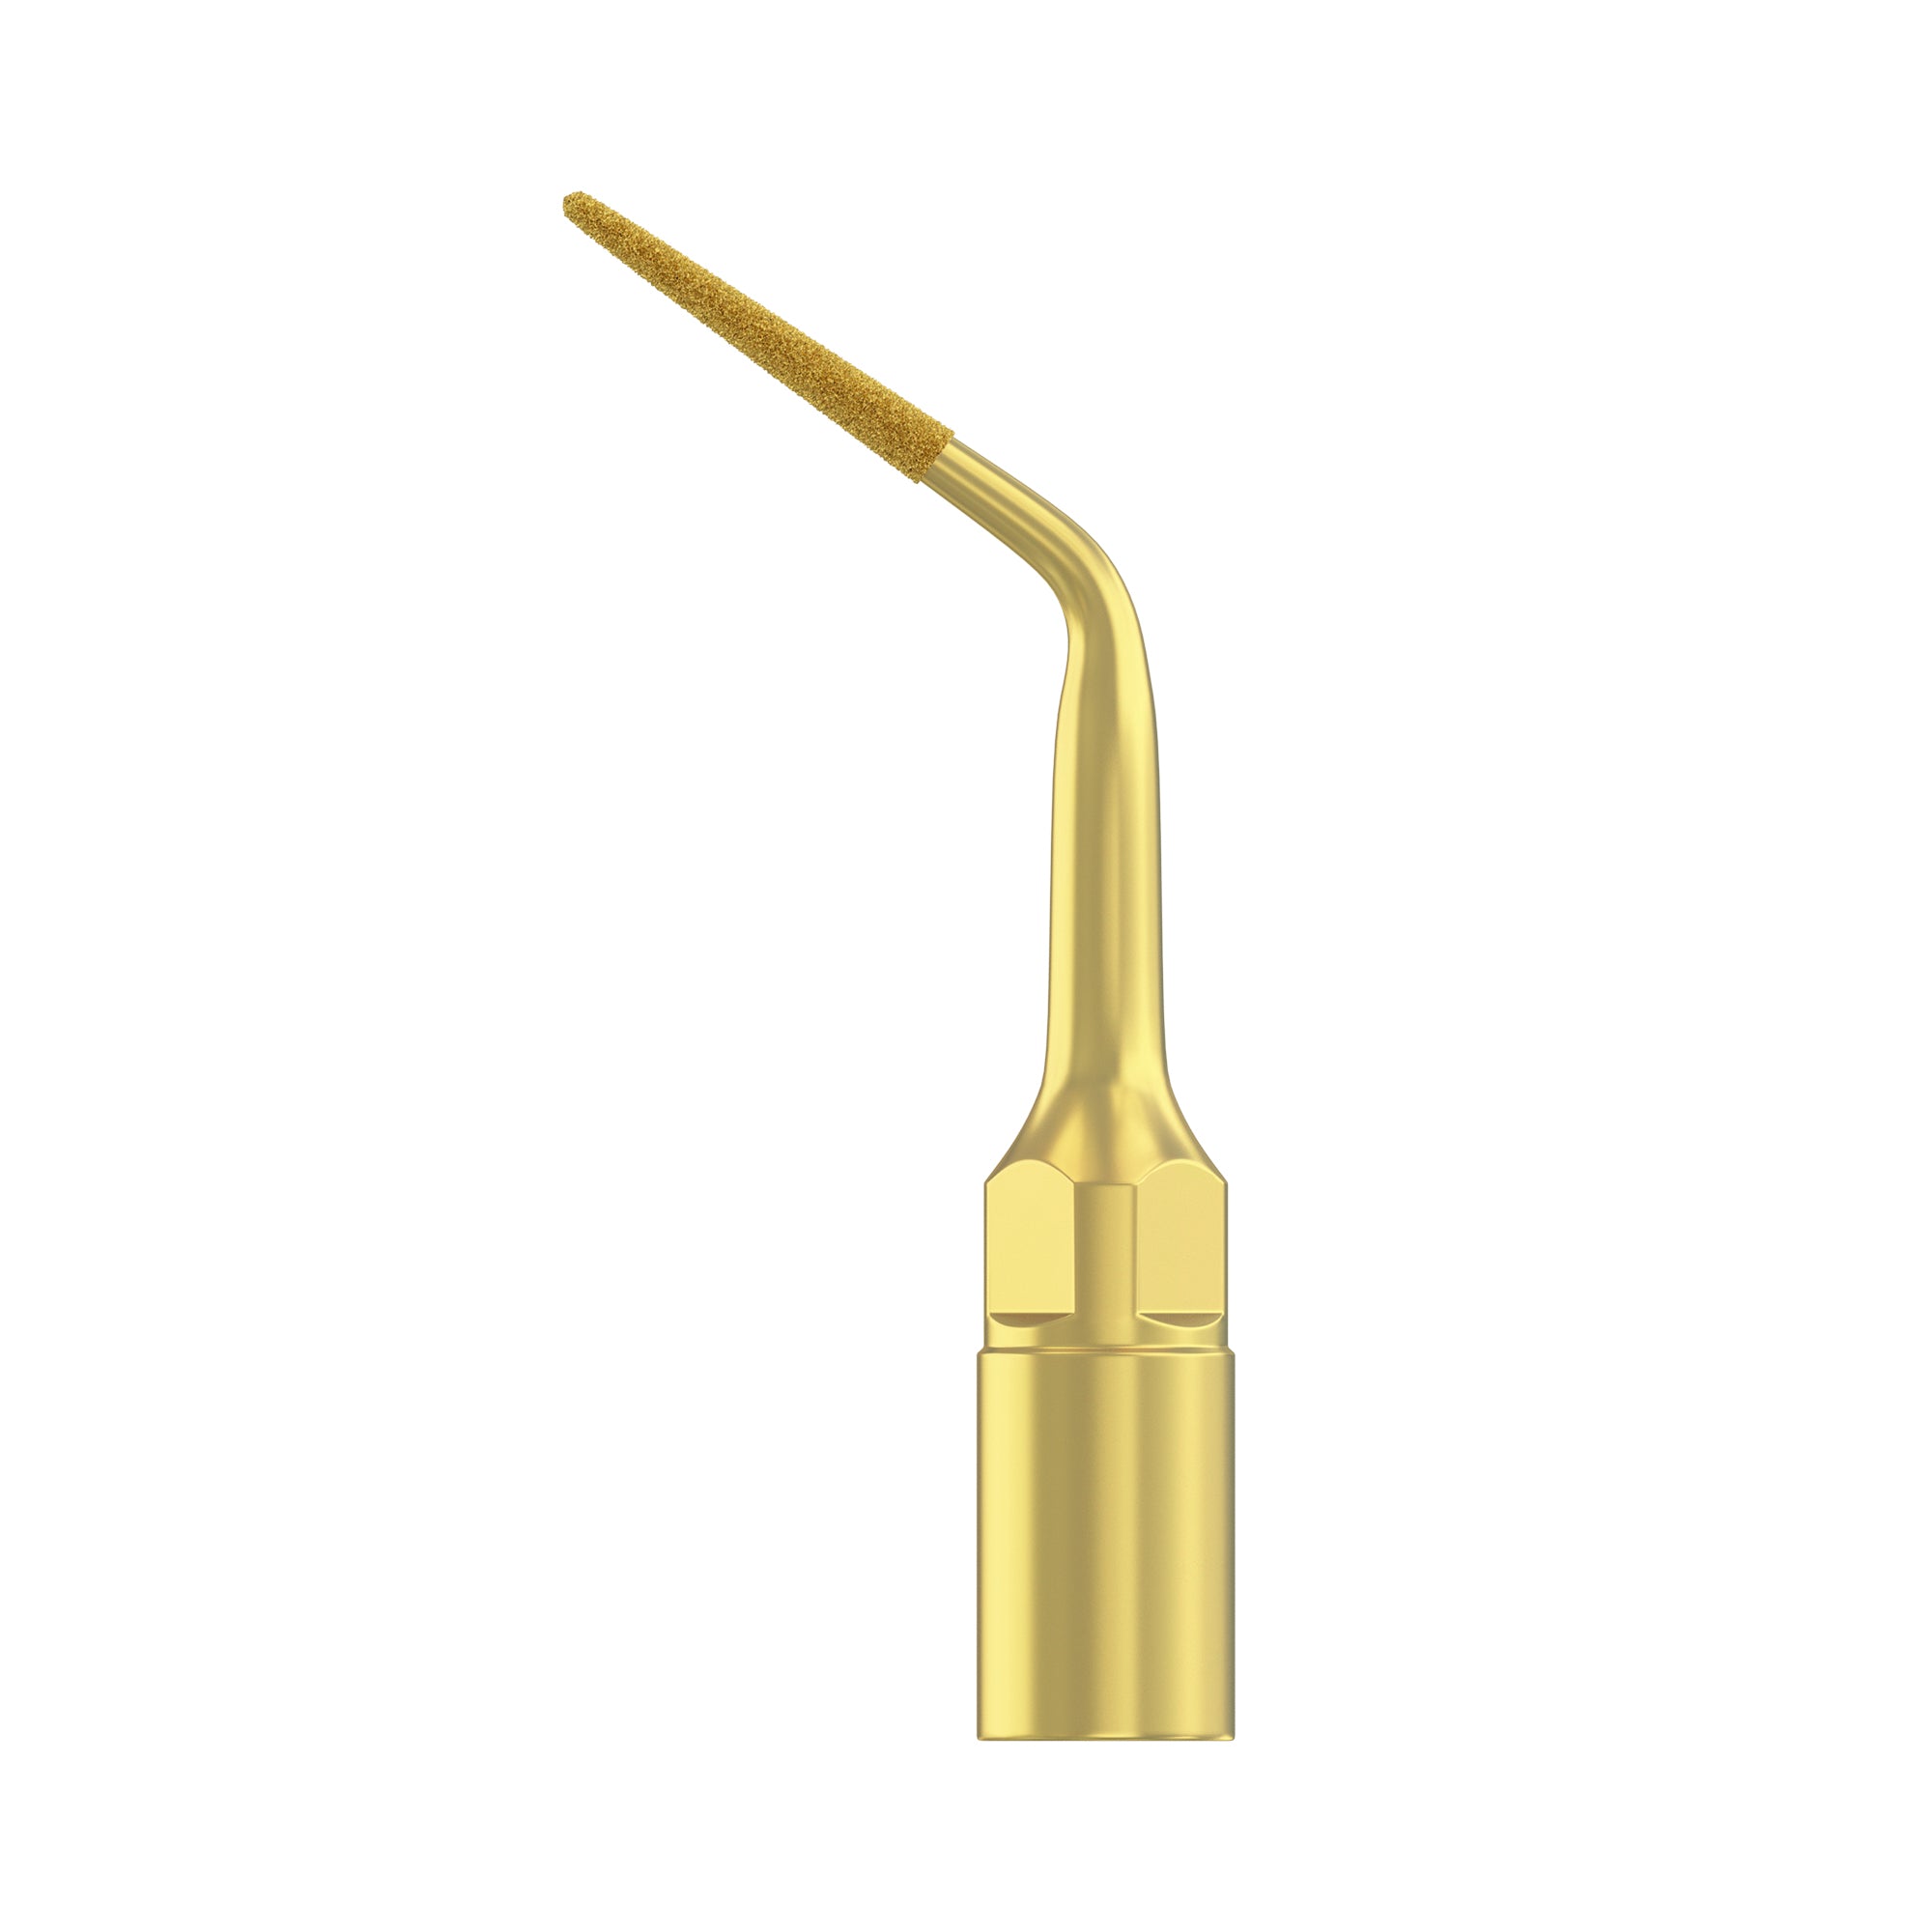 Mariotti Piezoelectric Surgical Tip UP4